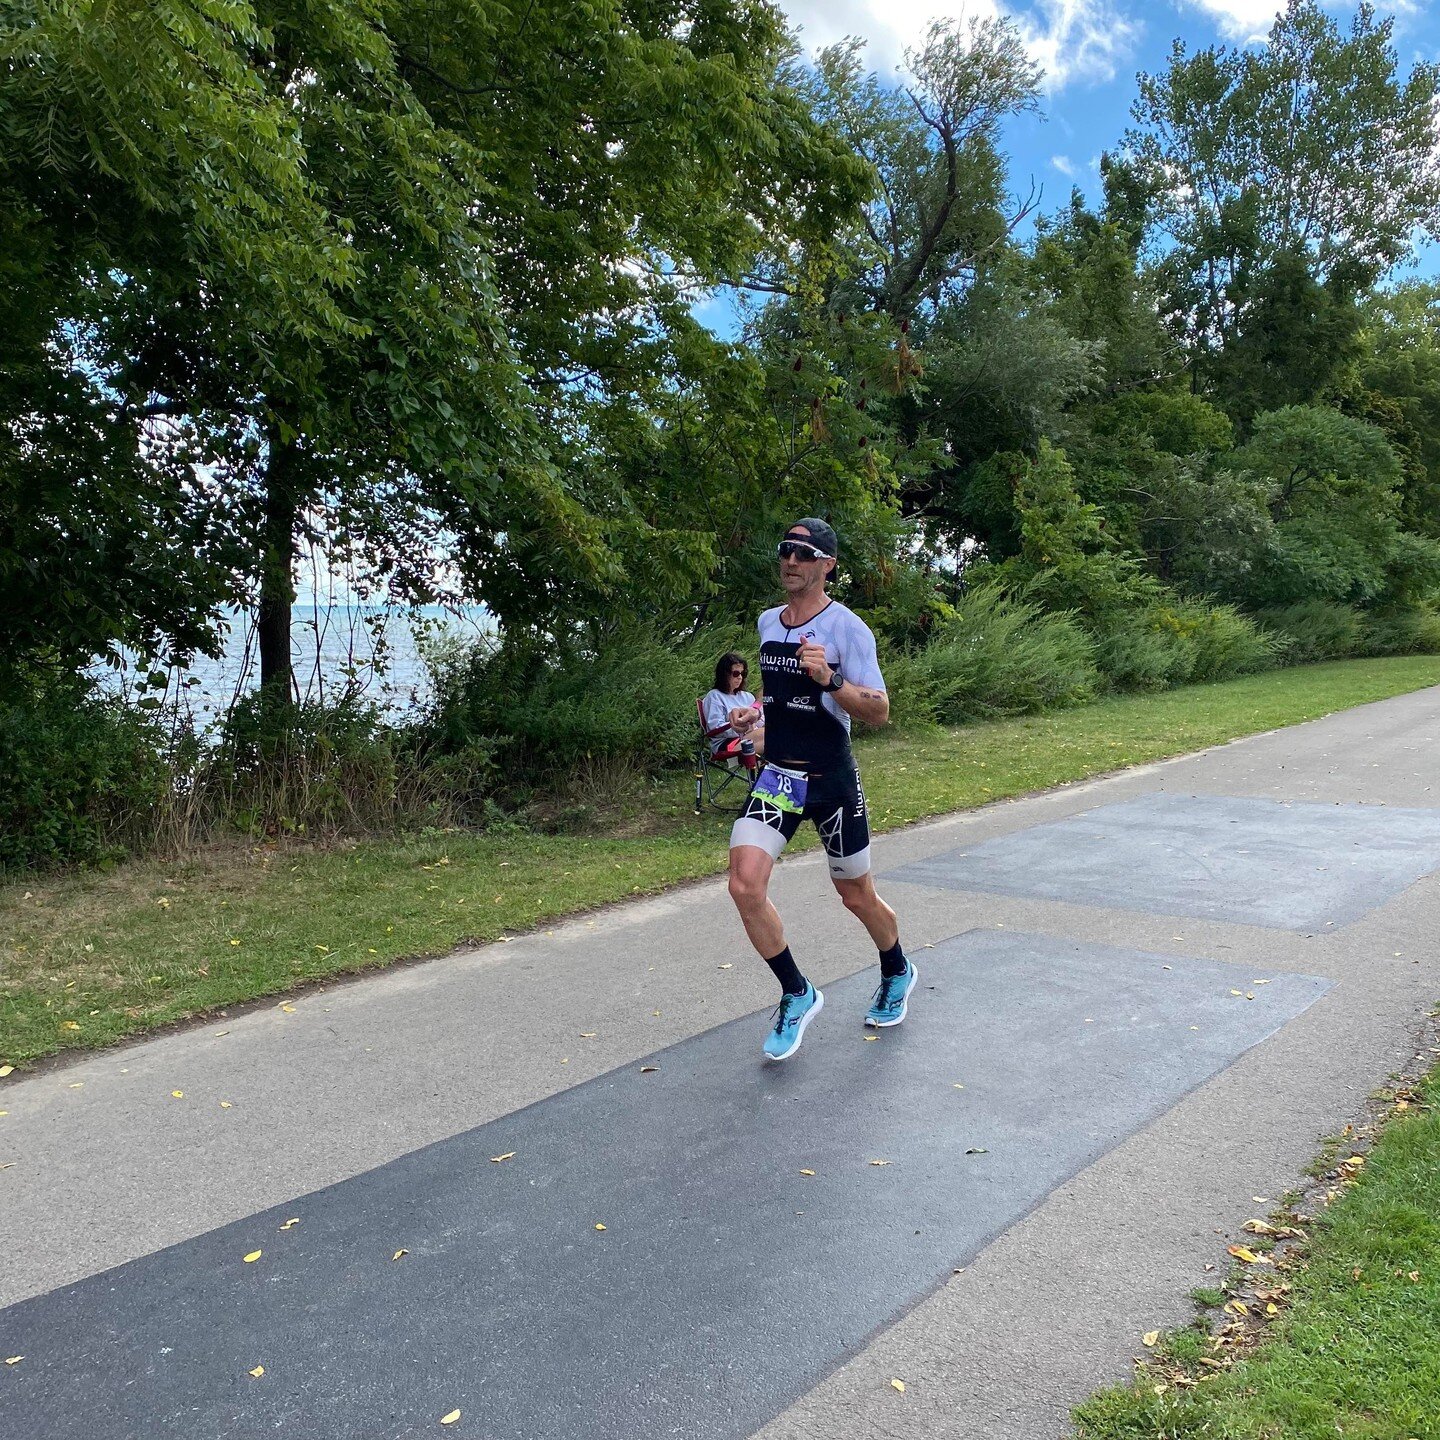 Another big congrats to Vmax Squad Scott Bradley @sbradley11 &ldquo;The Rochester Rocket&rdquo; for taking 1st Overall at the Rochester Triathlon in up-sate NY today and clocking the fastest bike and run splits of the day. Recovery from the Norseman 